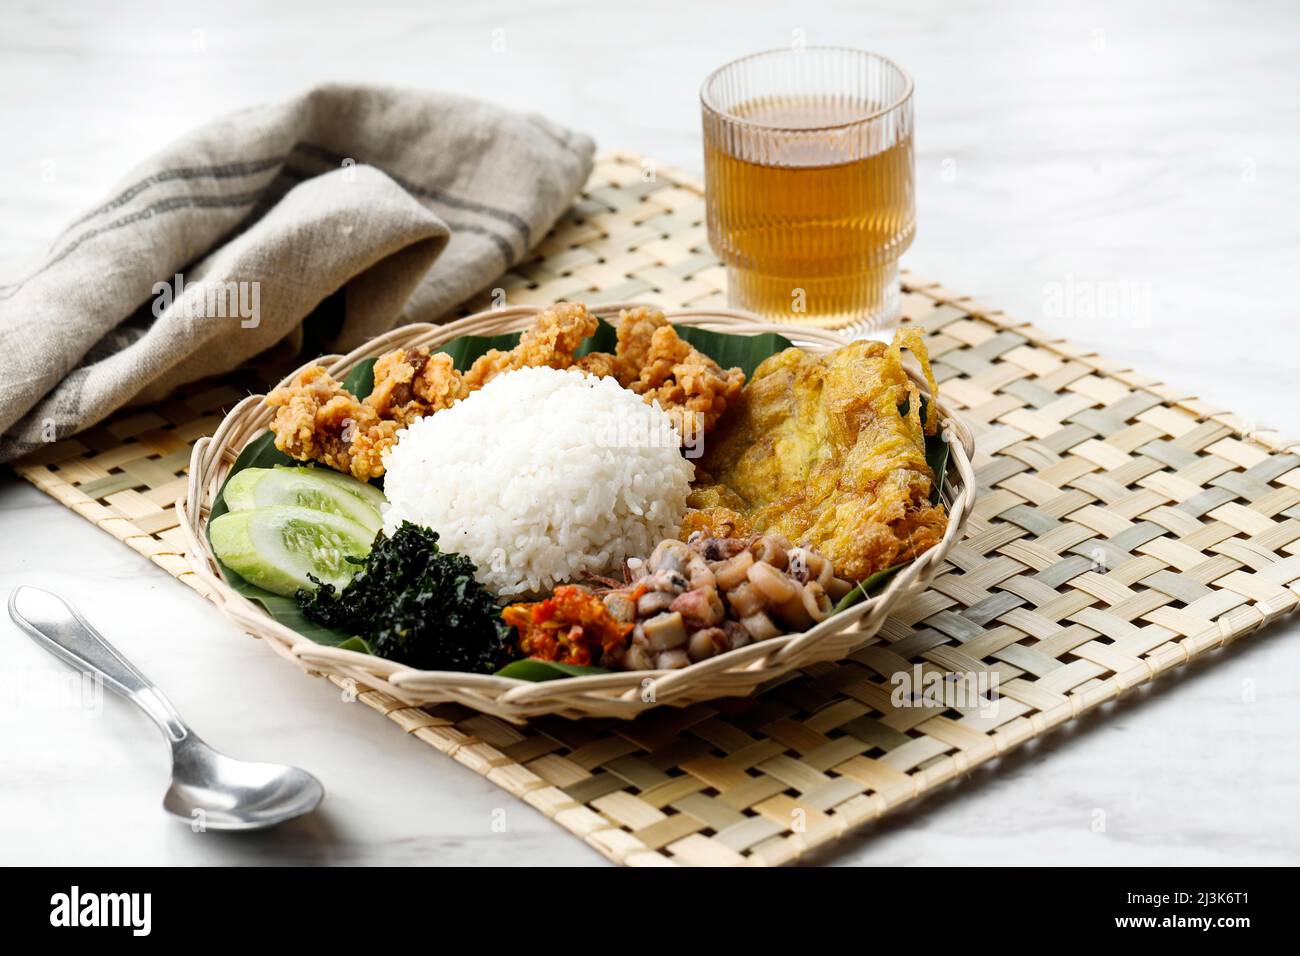 Nasi Campur Medan. Street Food Meal of Rice with Variety of Malay Side Dishes. Popular in Medan, North Sumatra. Stock Photo